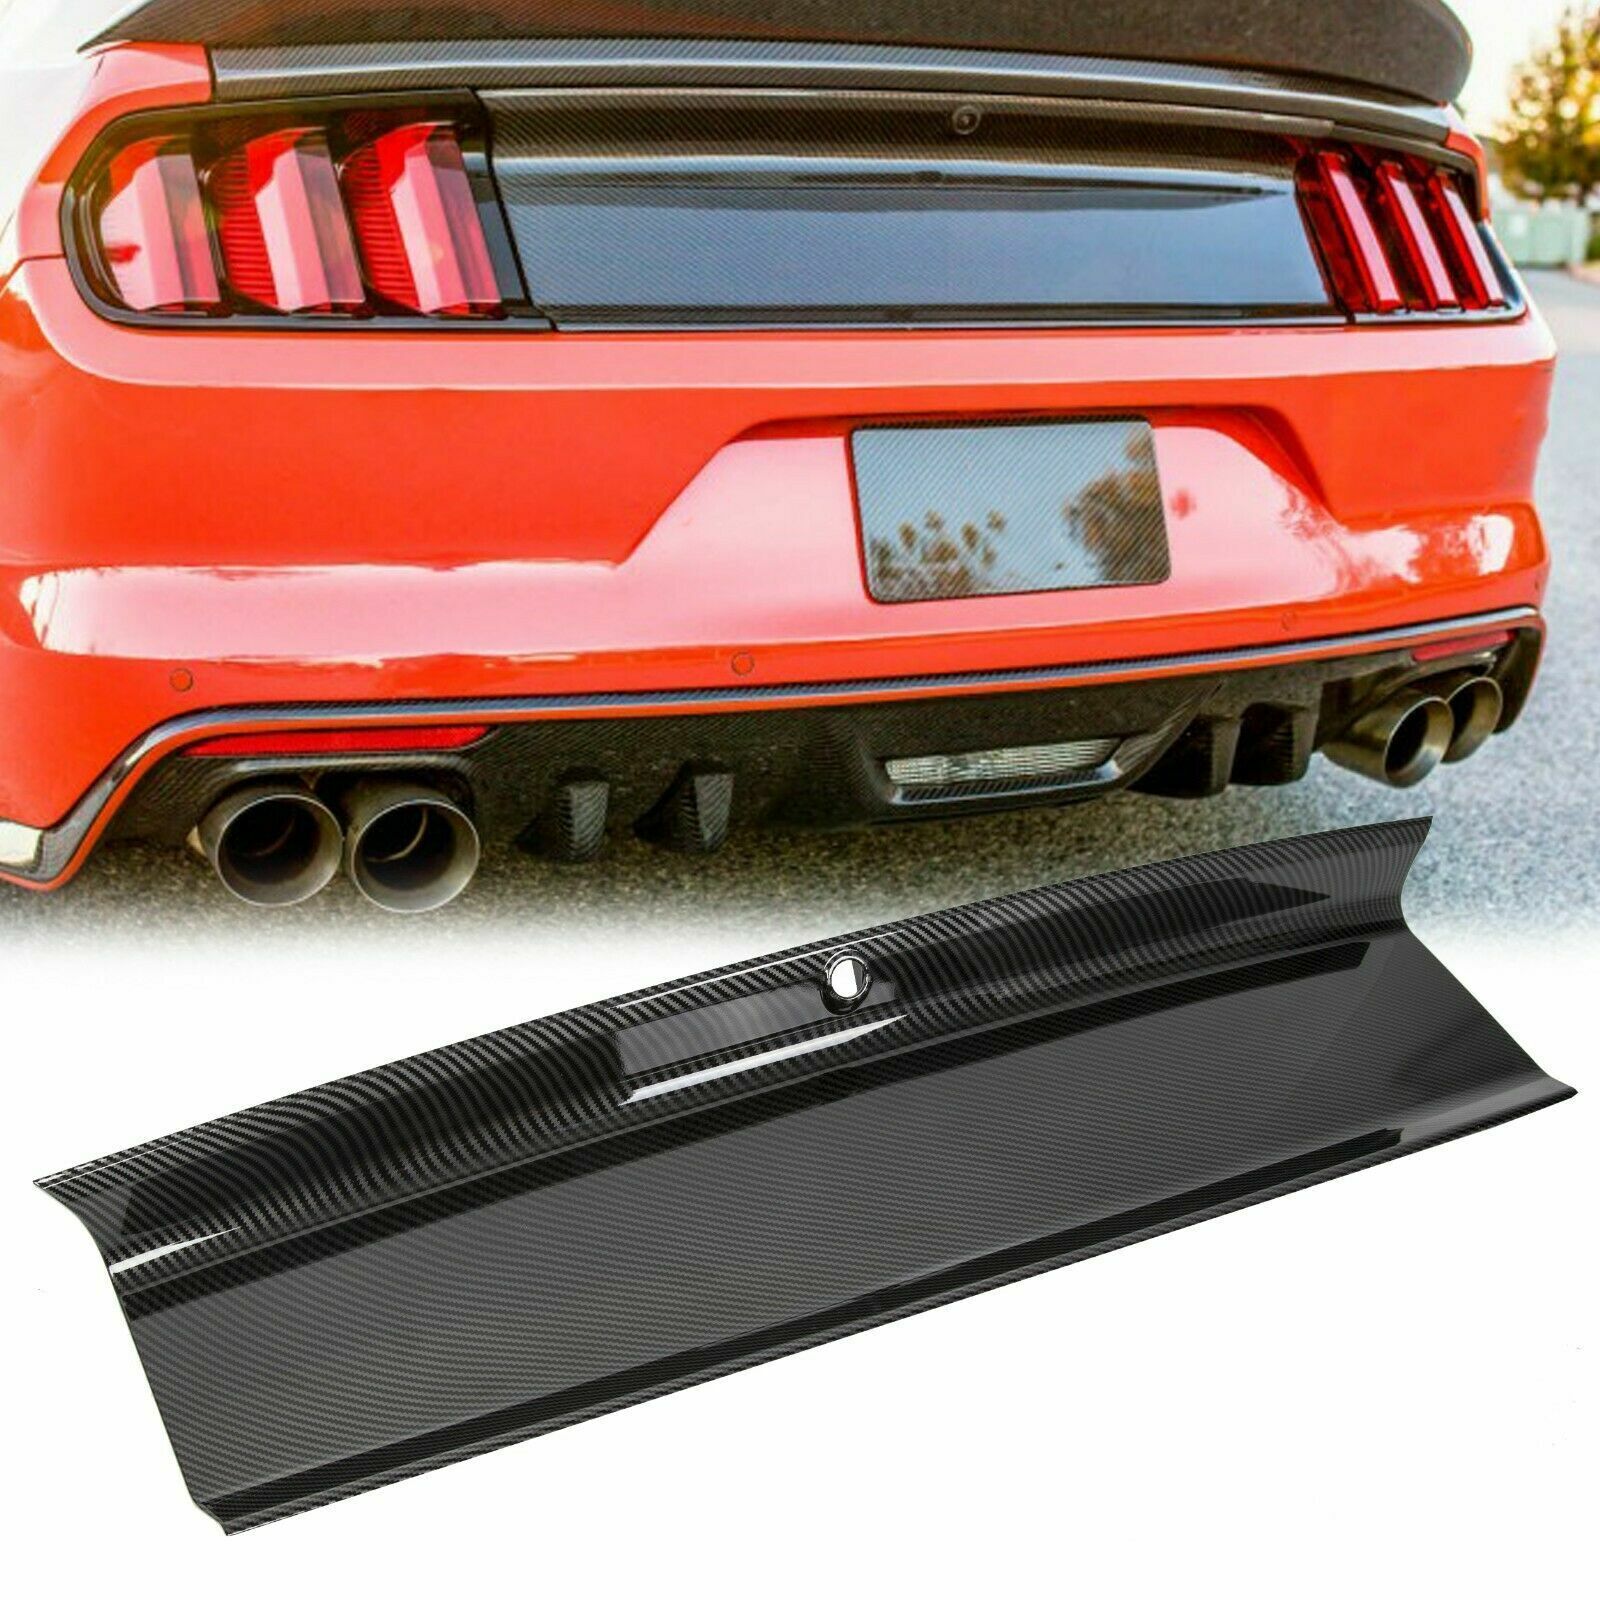 FOR 15-20 FORD MUSTANG GT CARBON FIBER COLOR REAR TRUNK PANEL DECKLID TRIM COVER